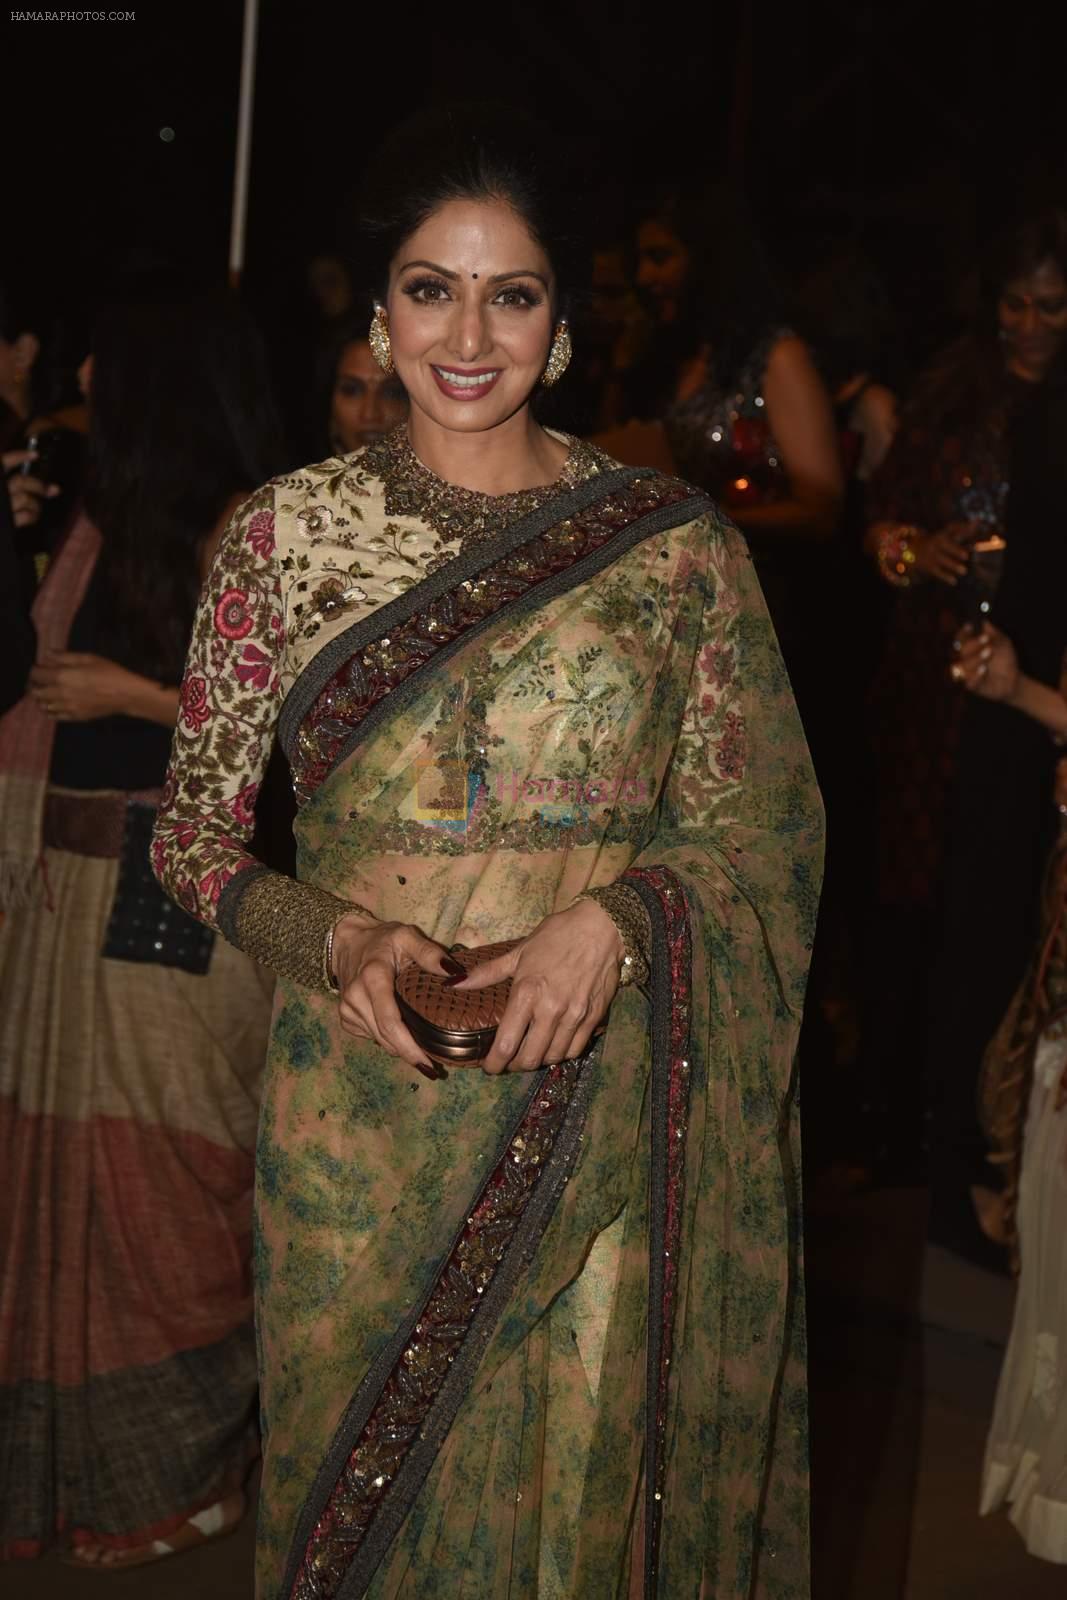 Sridevi at Sabyasachi show in Byculla on 17th March 2015